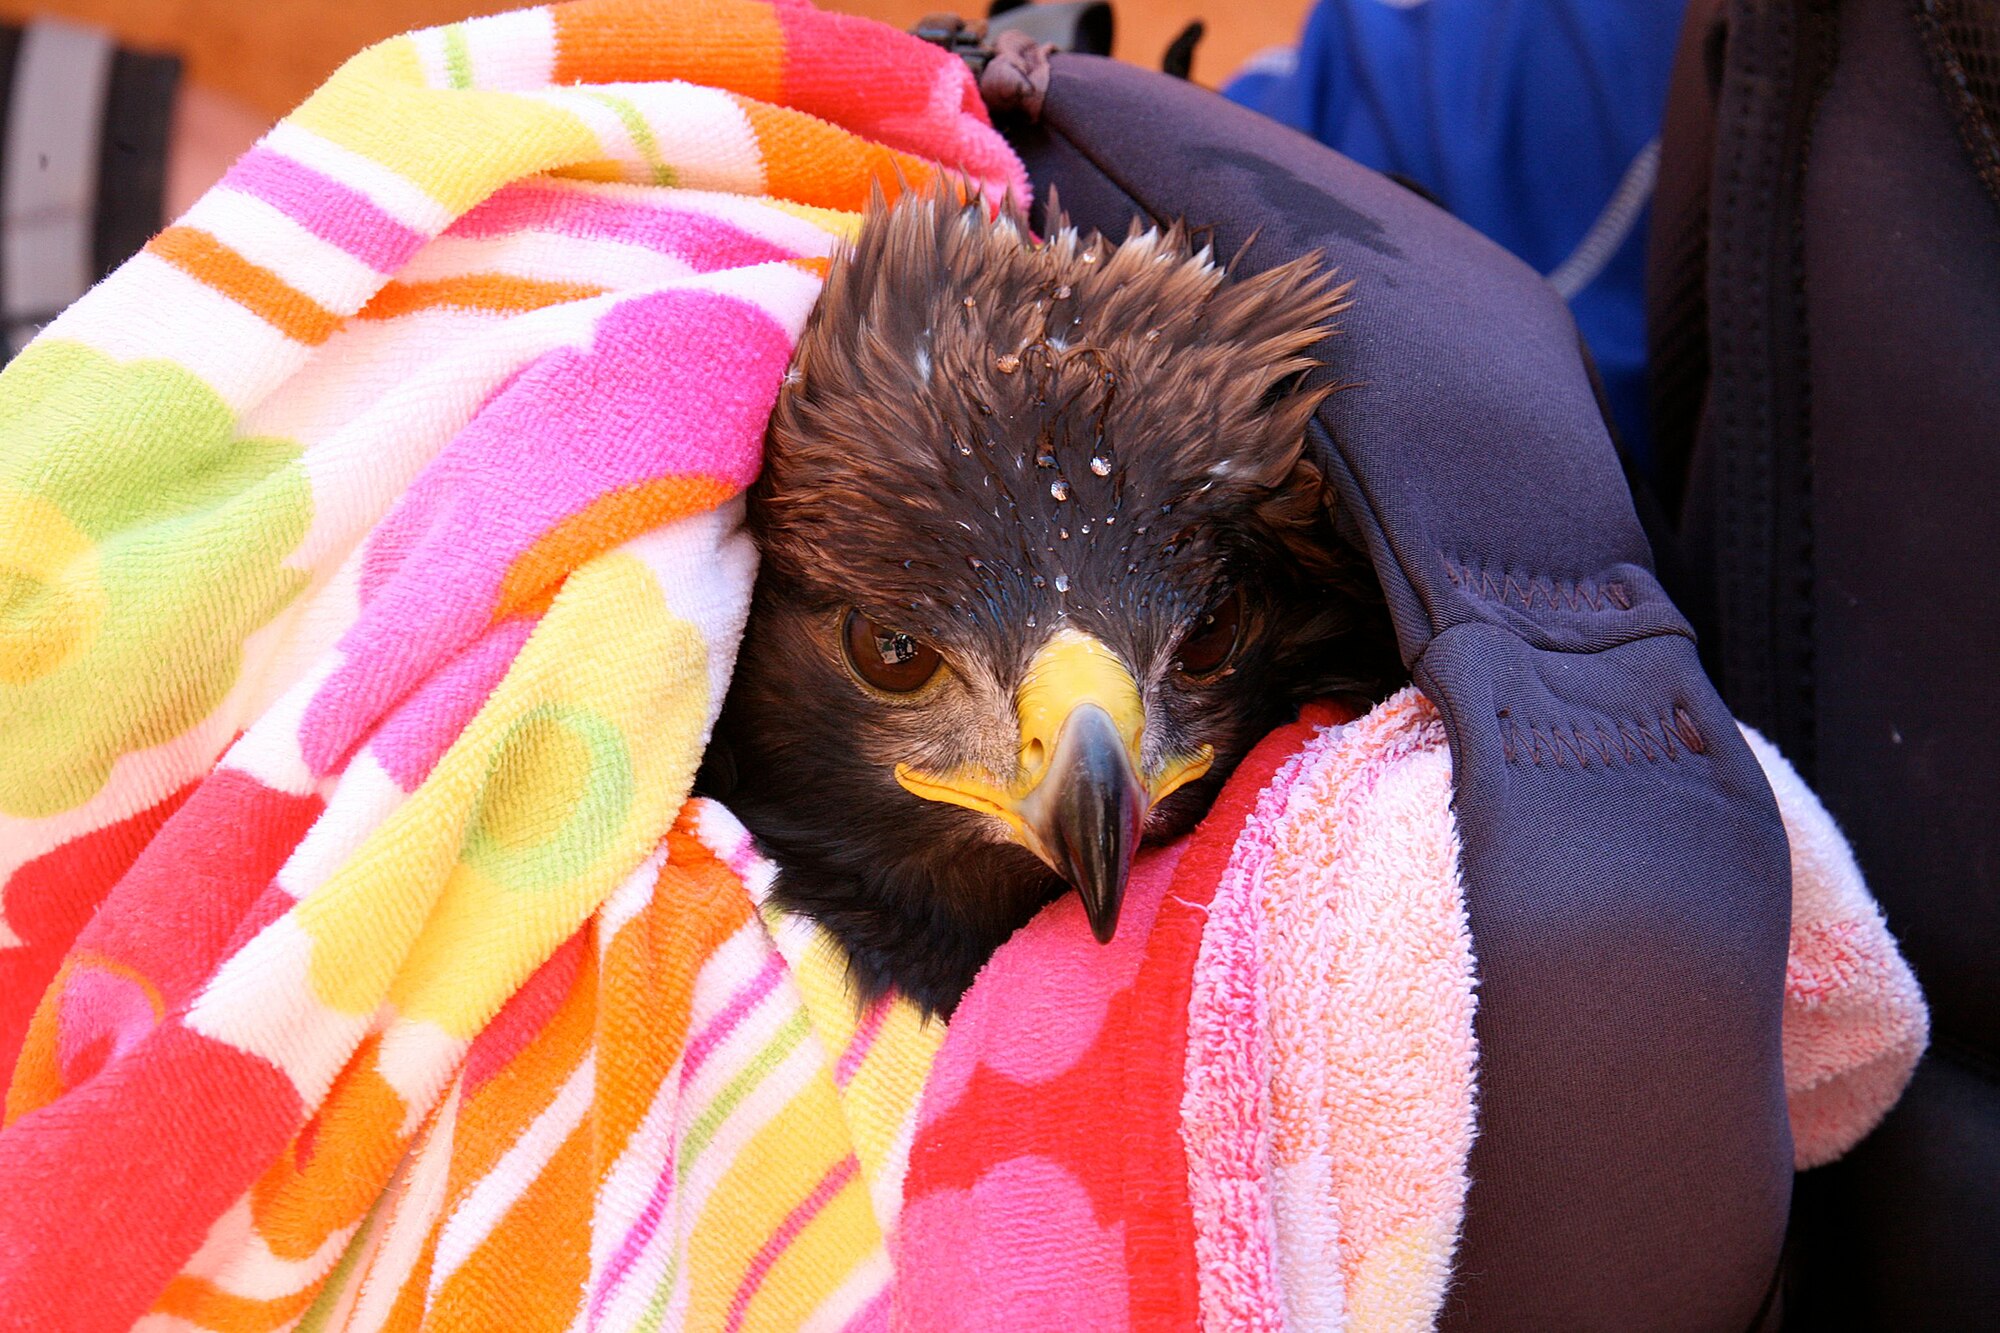 Cliff, the rescued Golden Eagle, peers from within his towel wrap and life vest as he prepares to be transported.